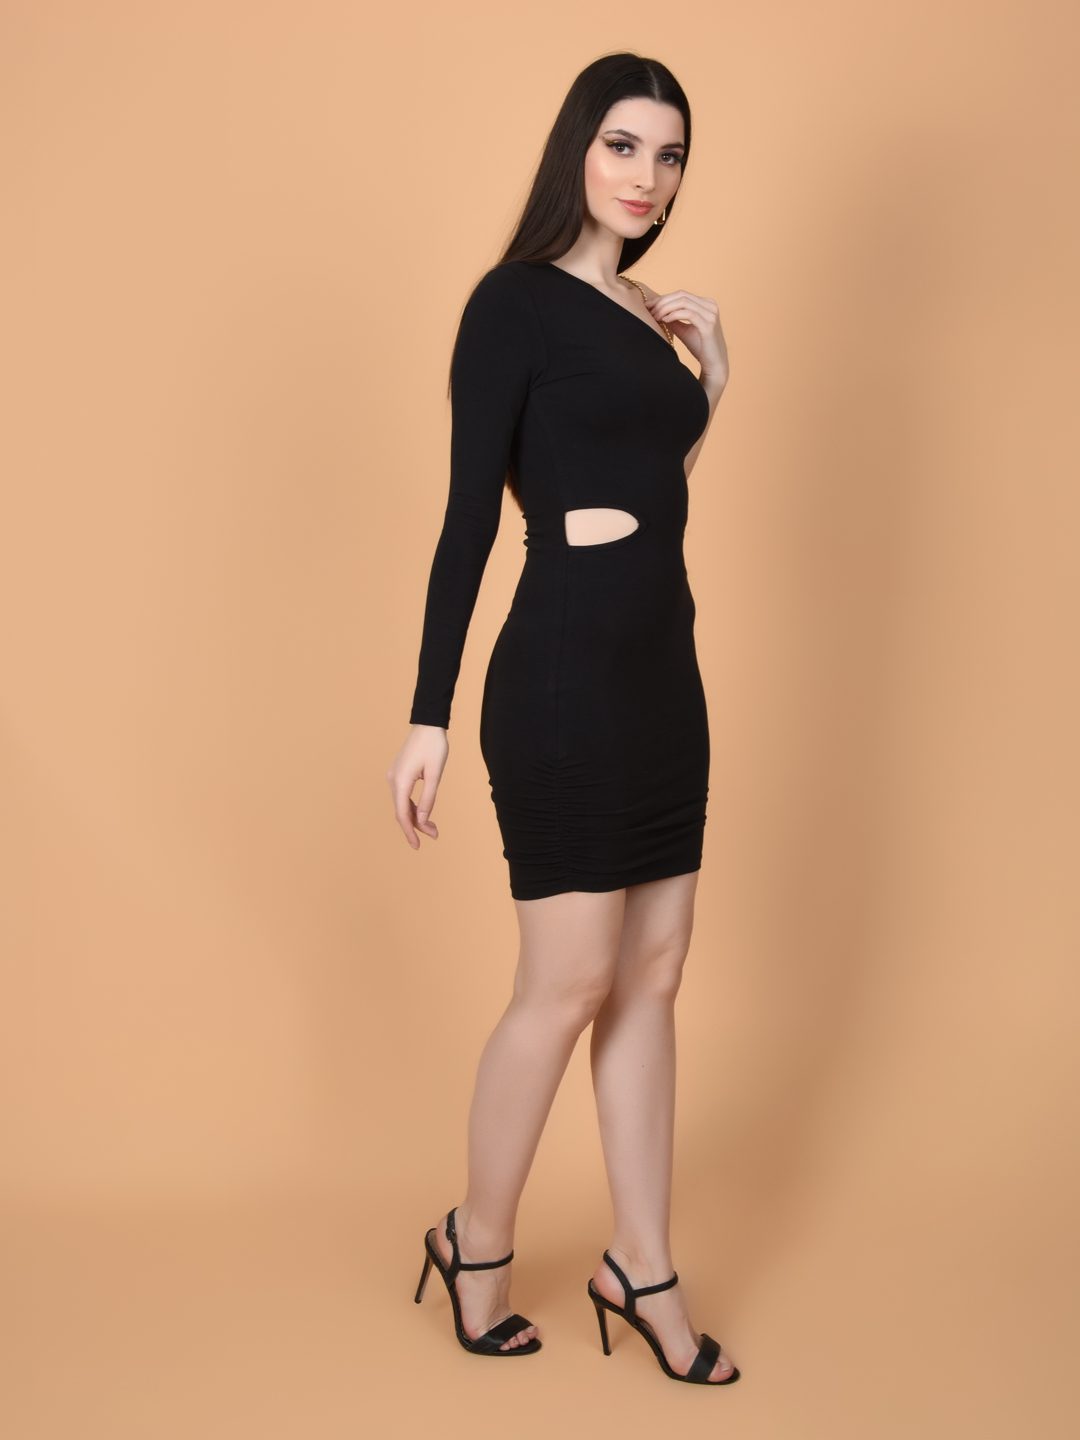 Flawless Women Solid Black Party Dress | BRITNY Being Flawless